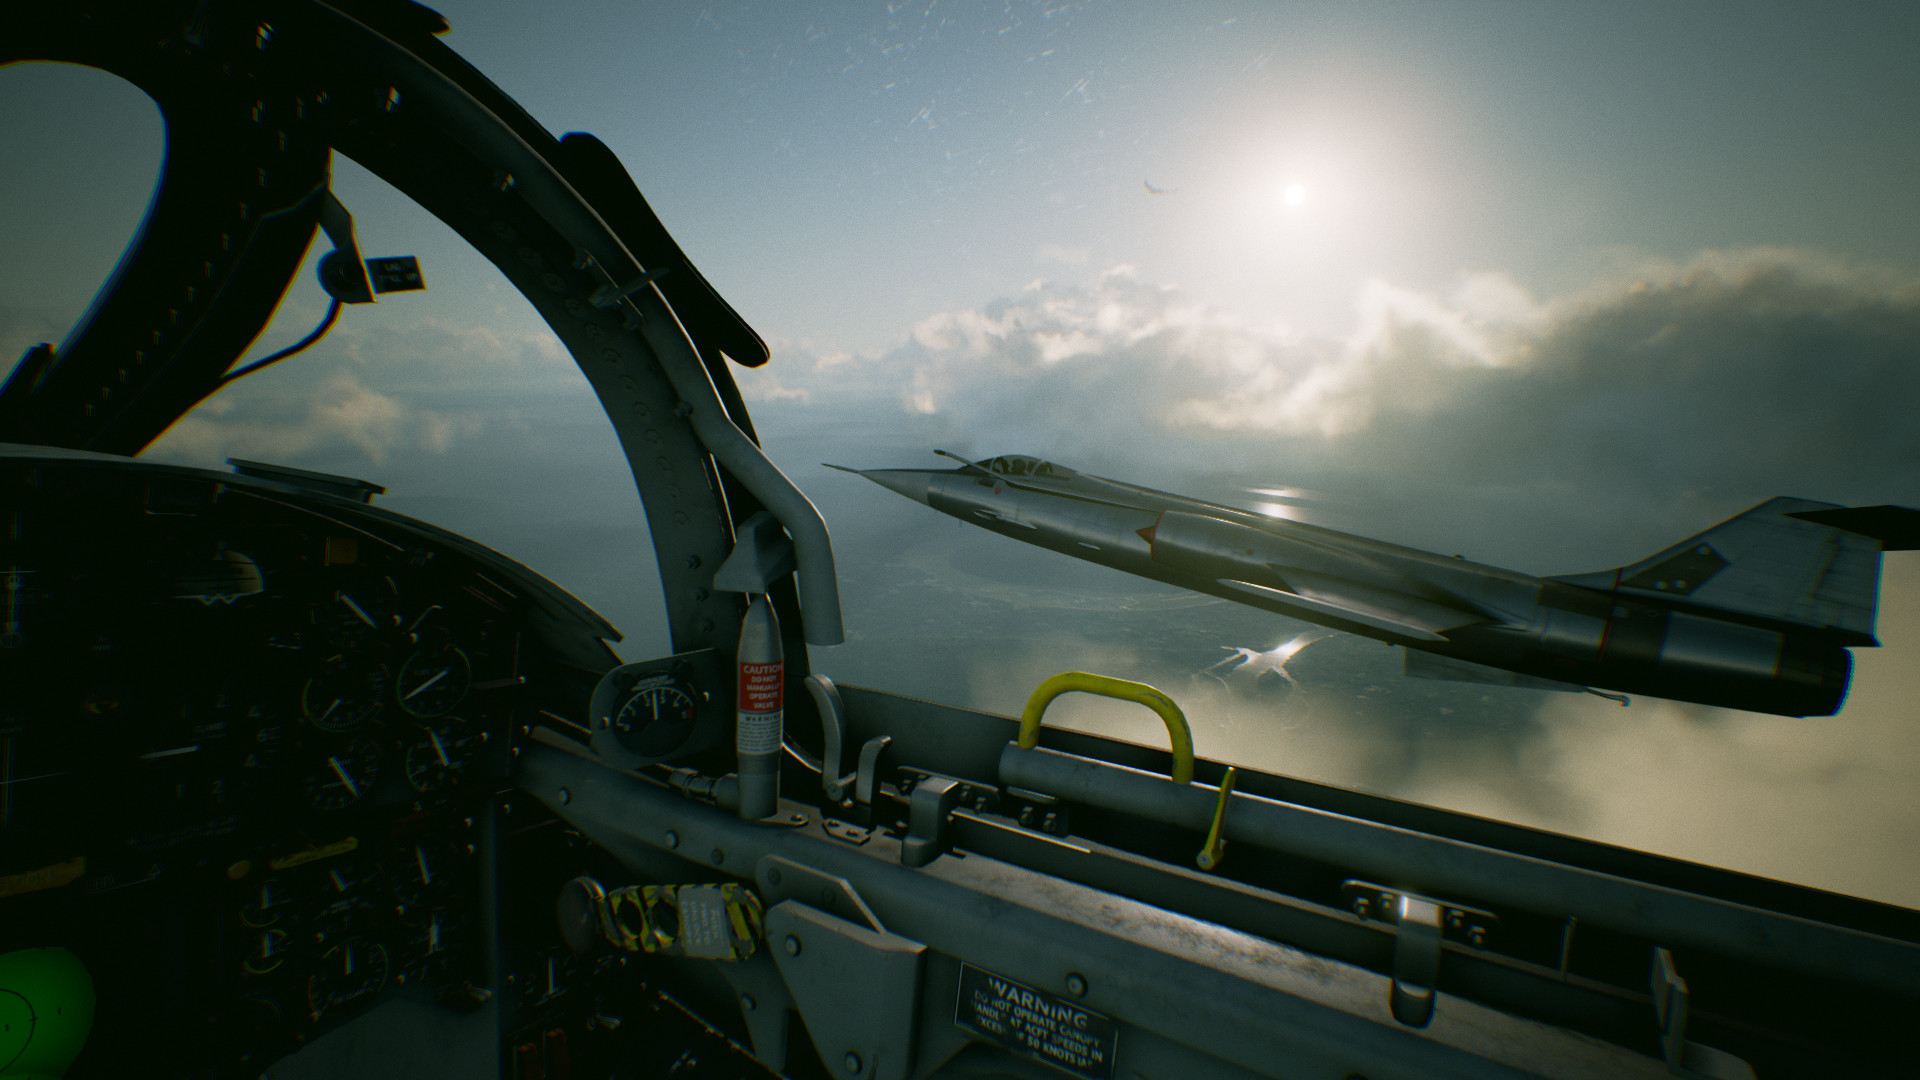 Ace Combat 7: Skies Unknown PC System Requirements Revealed, and